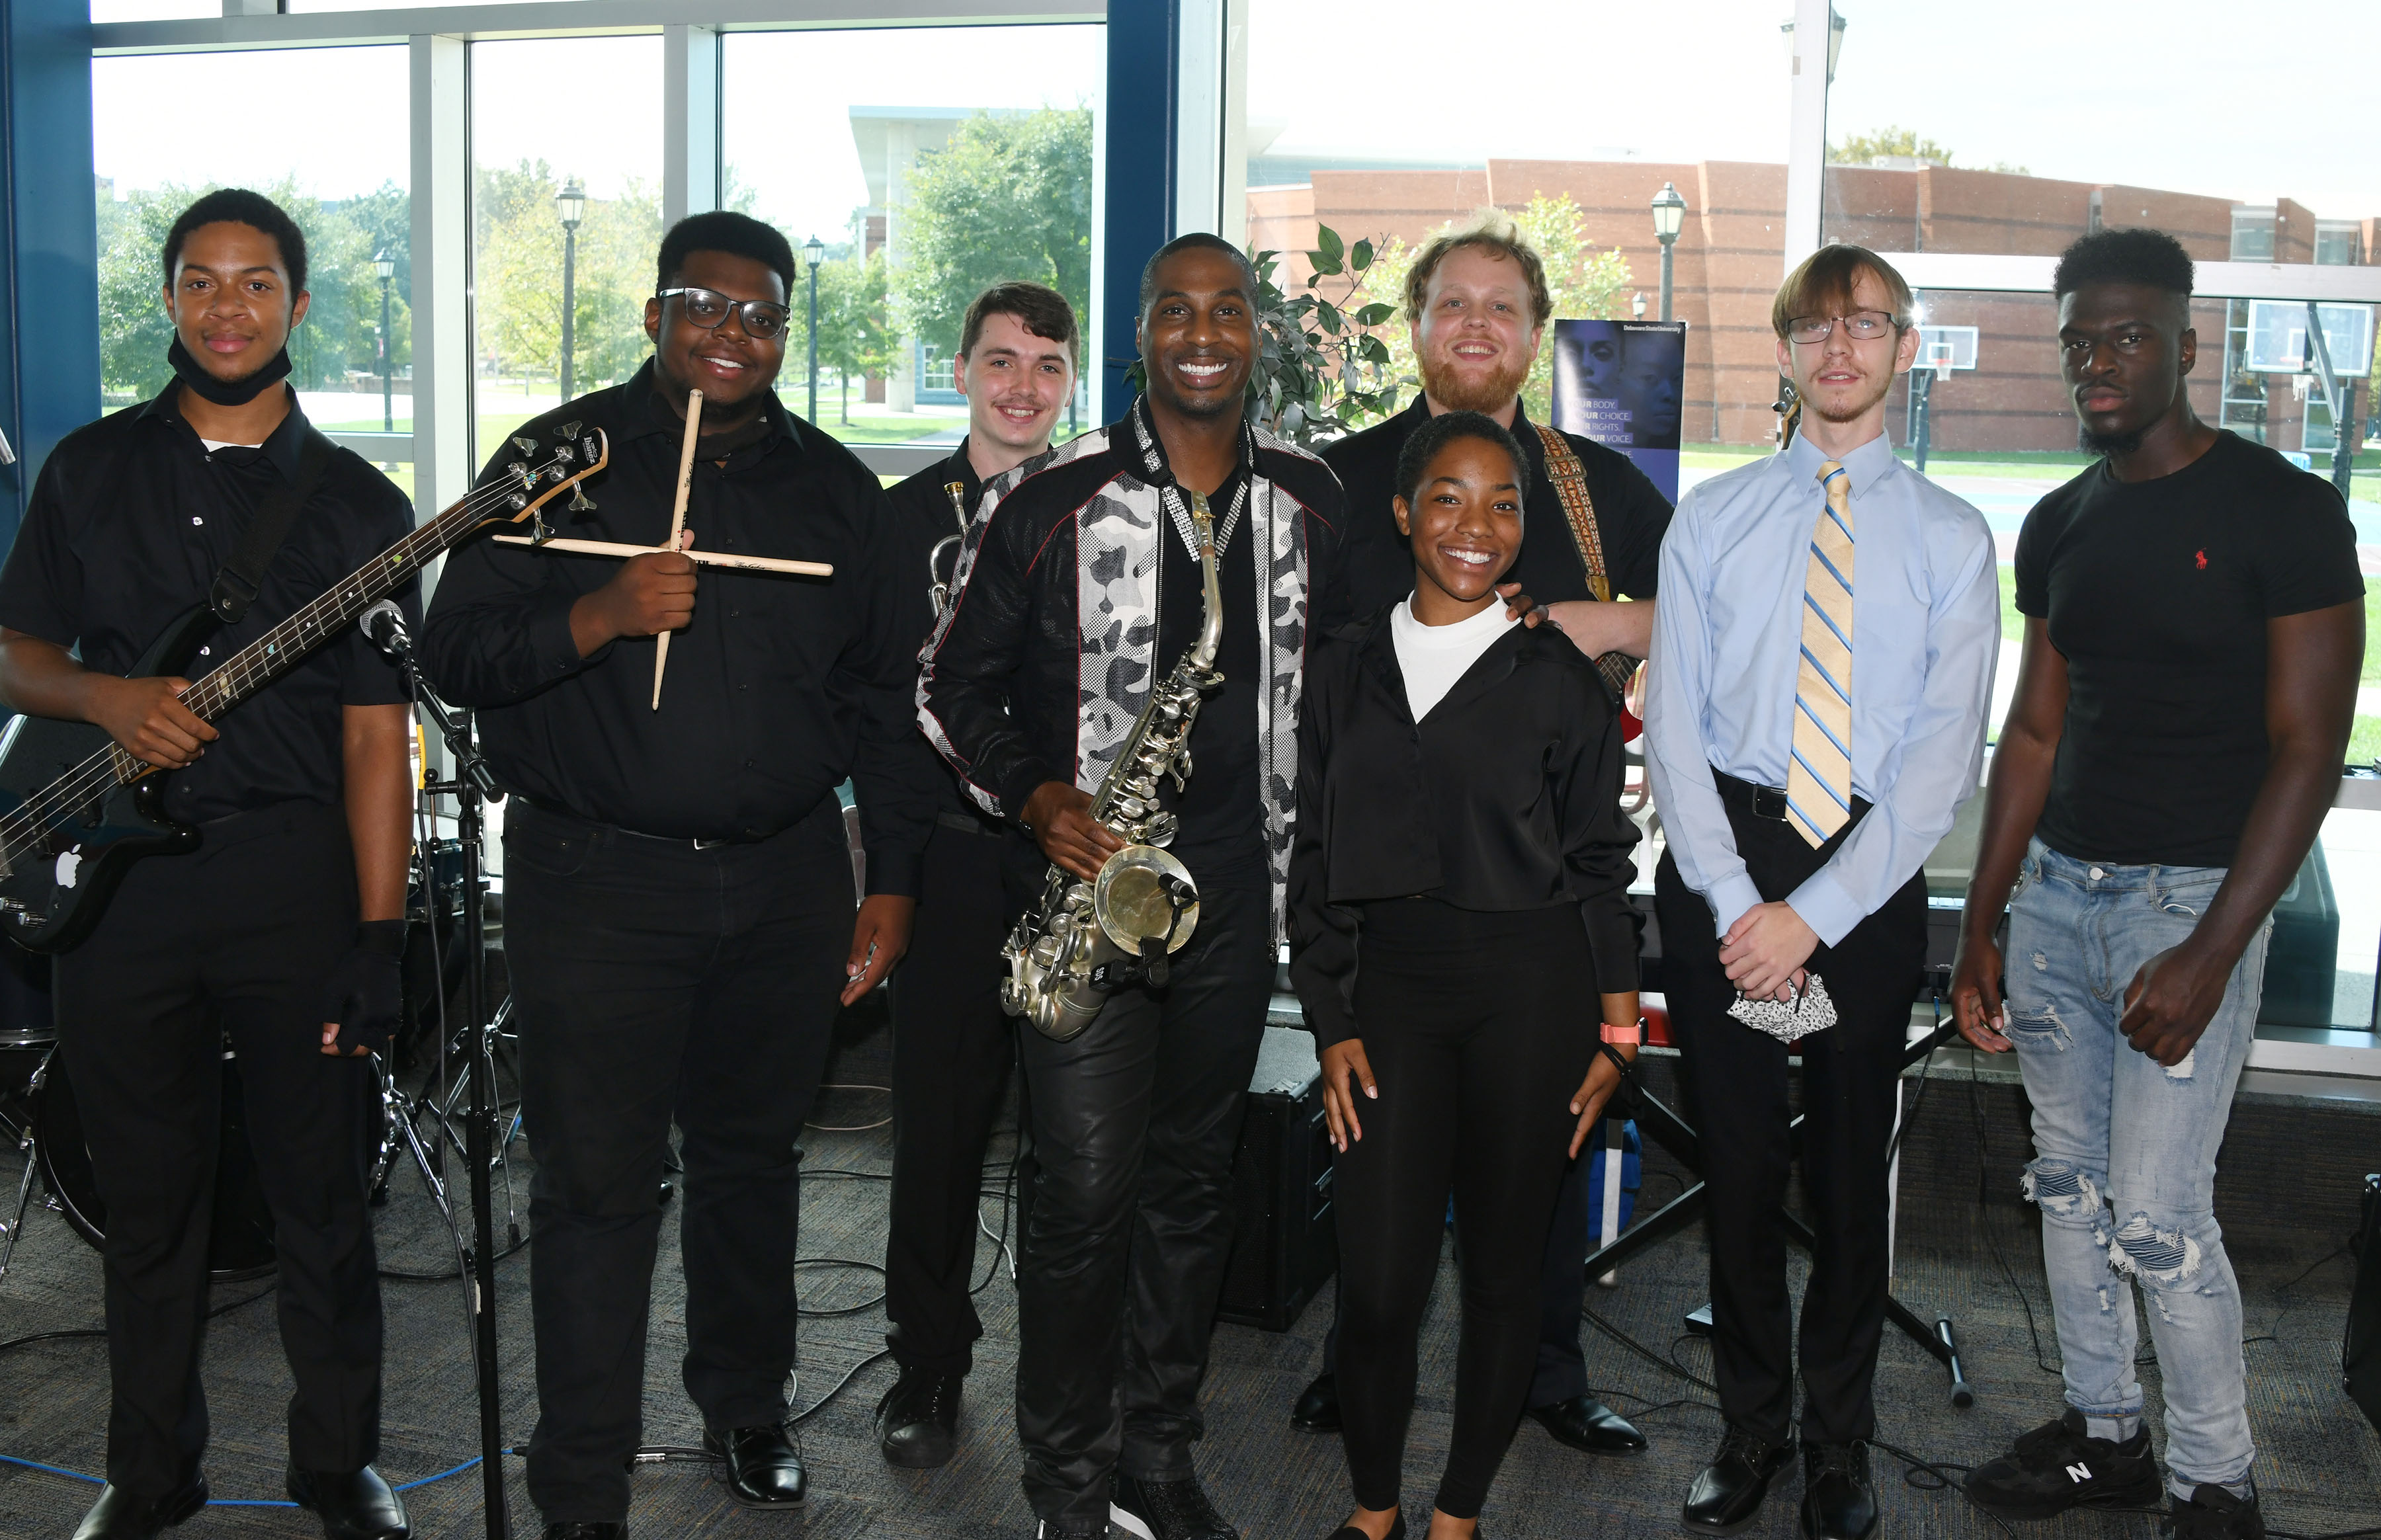 Renowned saxphonist Eric Darius performs with Del State musicians